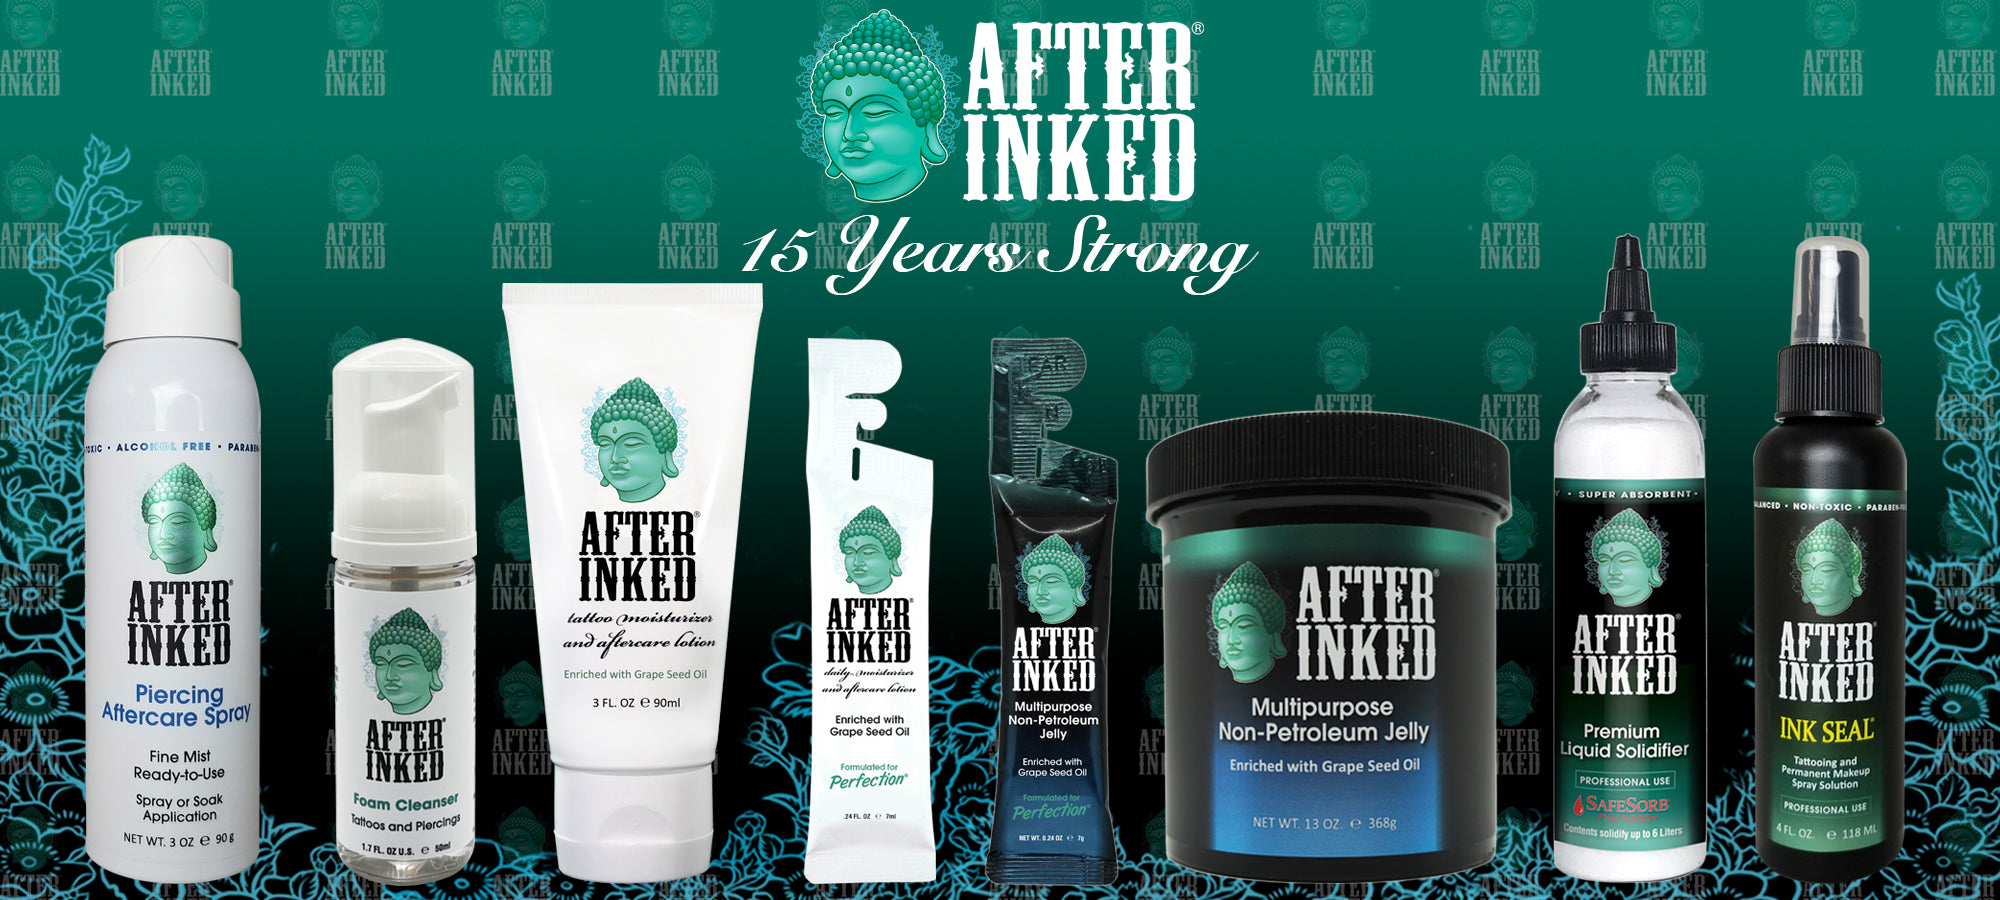 Contractpacked tattoo moisturizer tubes offer multiple benefits   Packaging World